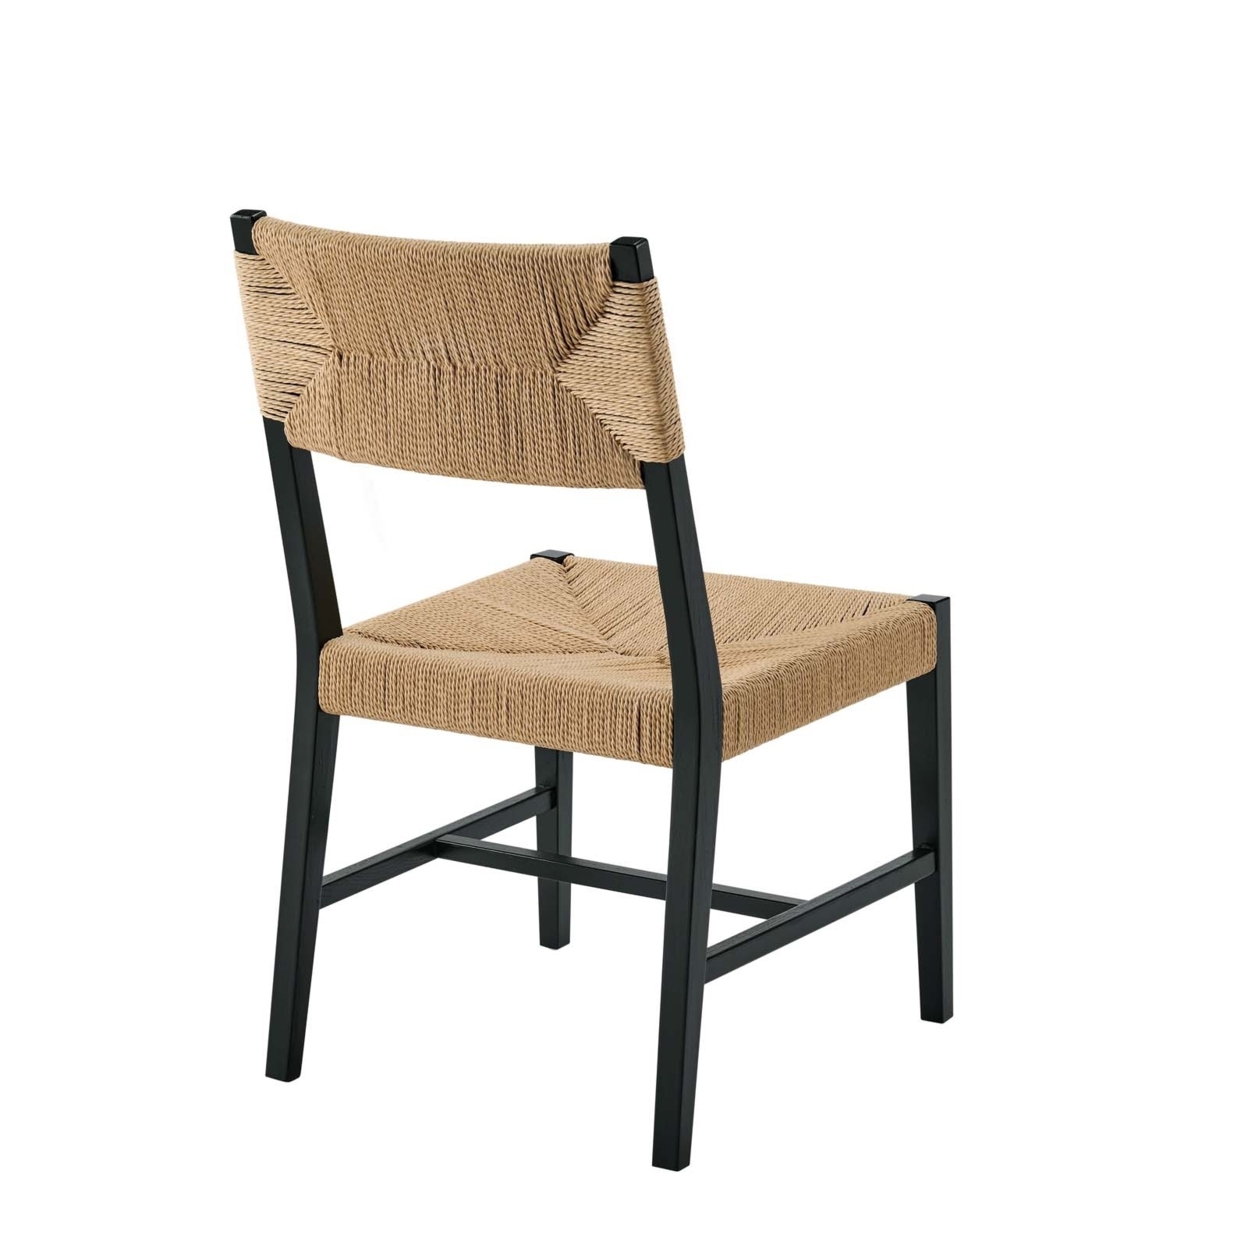 Bodie Wood Dining Chair, Black Natural